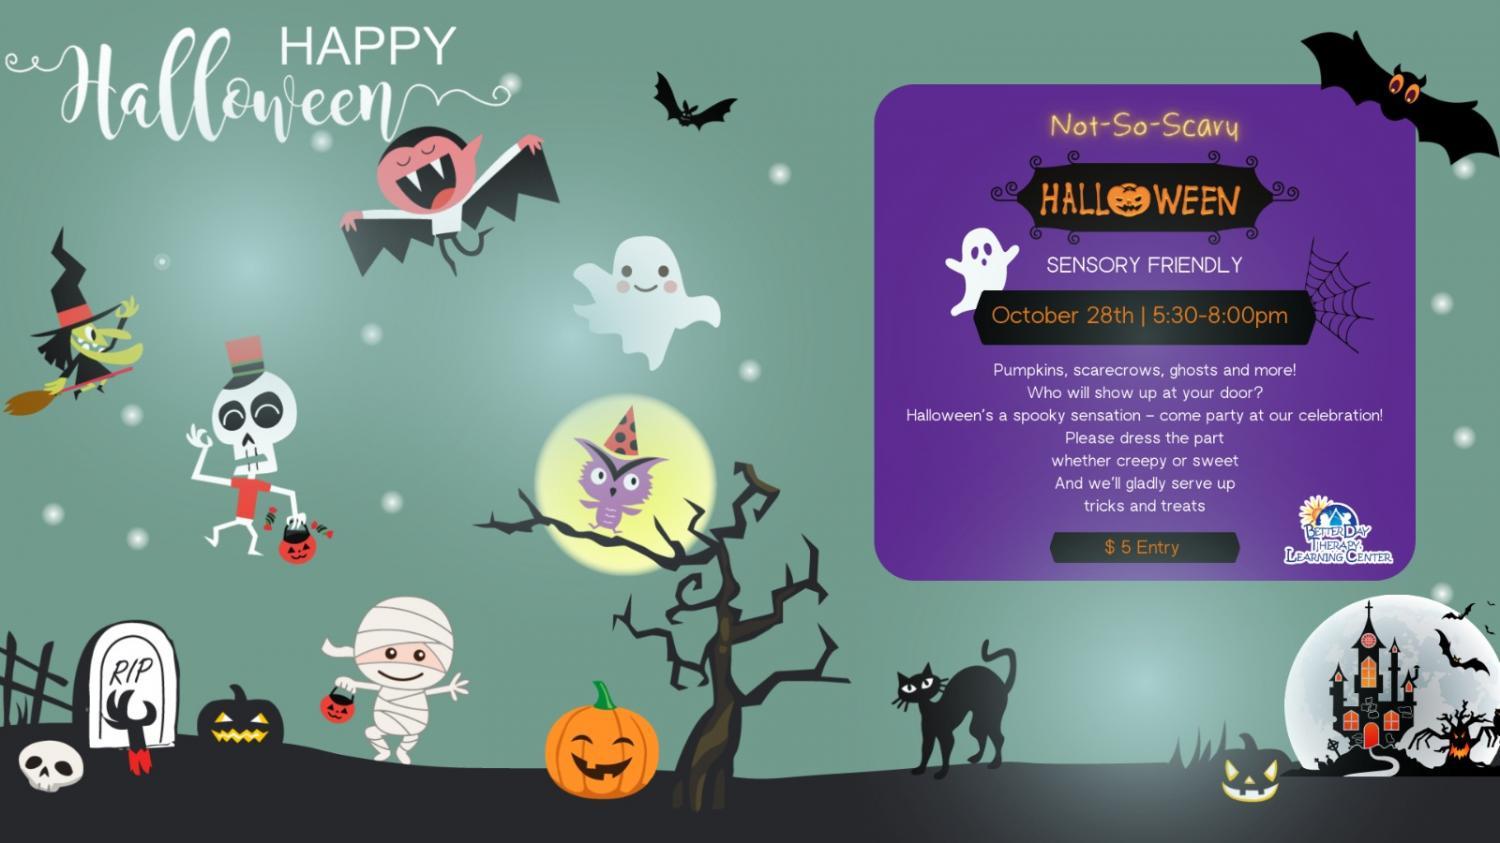 NOT-SO-SCARY HALLOWEEN PARTY ~ SENSORY FRIENDLY
Fri Oct 28, 5:30 PM - Fri Oct 28, 8:00 PM
in 8 days